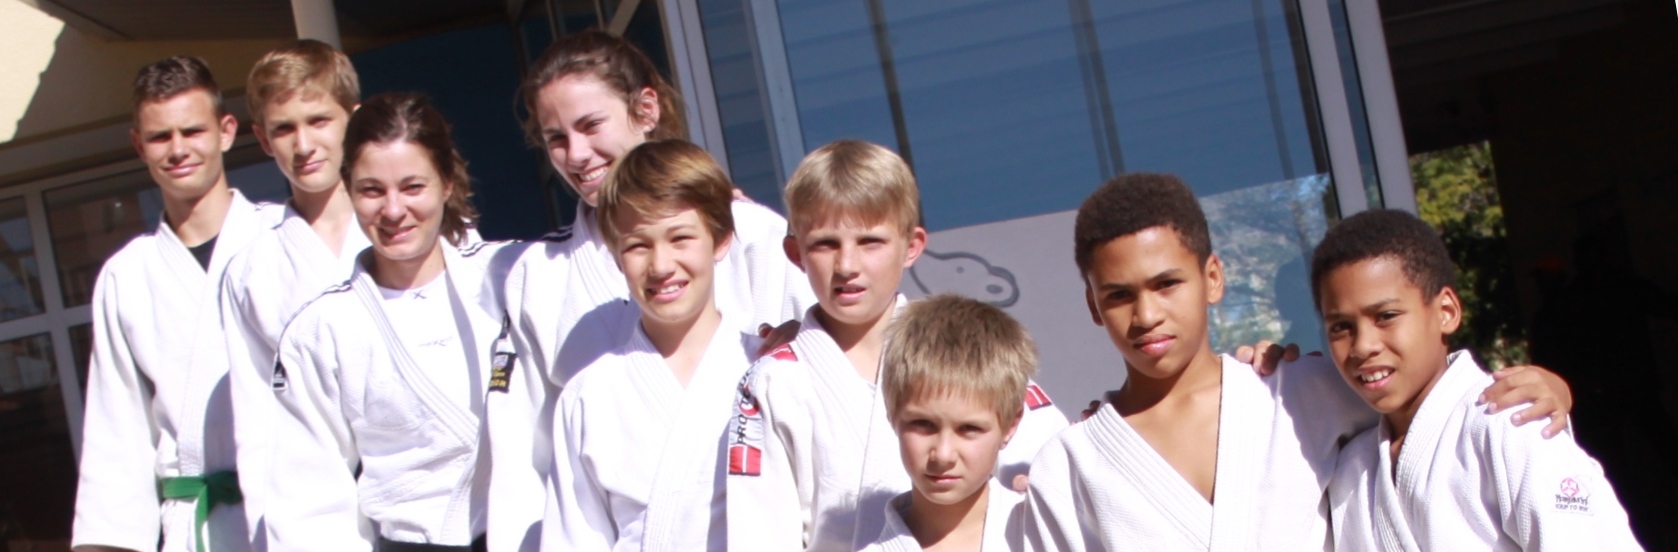 Fingers crossed for DHPS judoka: South Africa Judo Open Championships